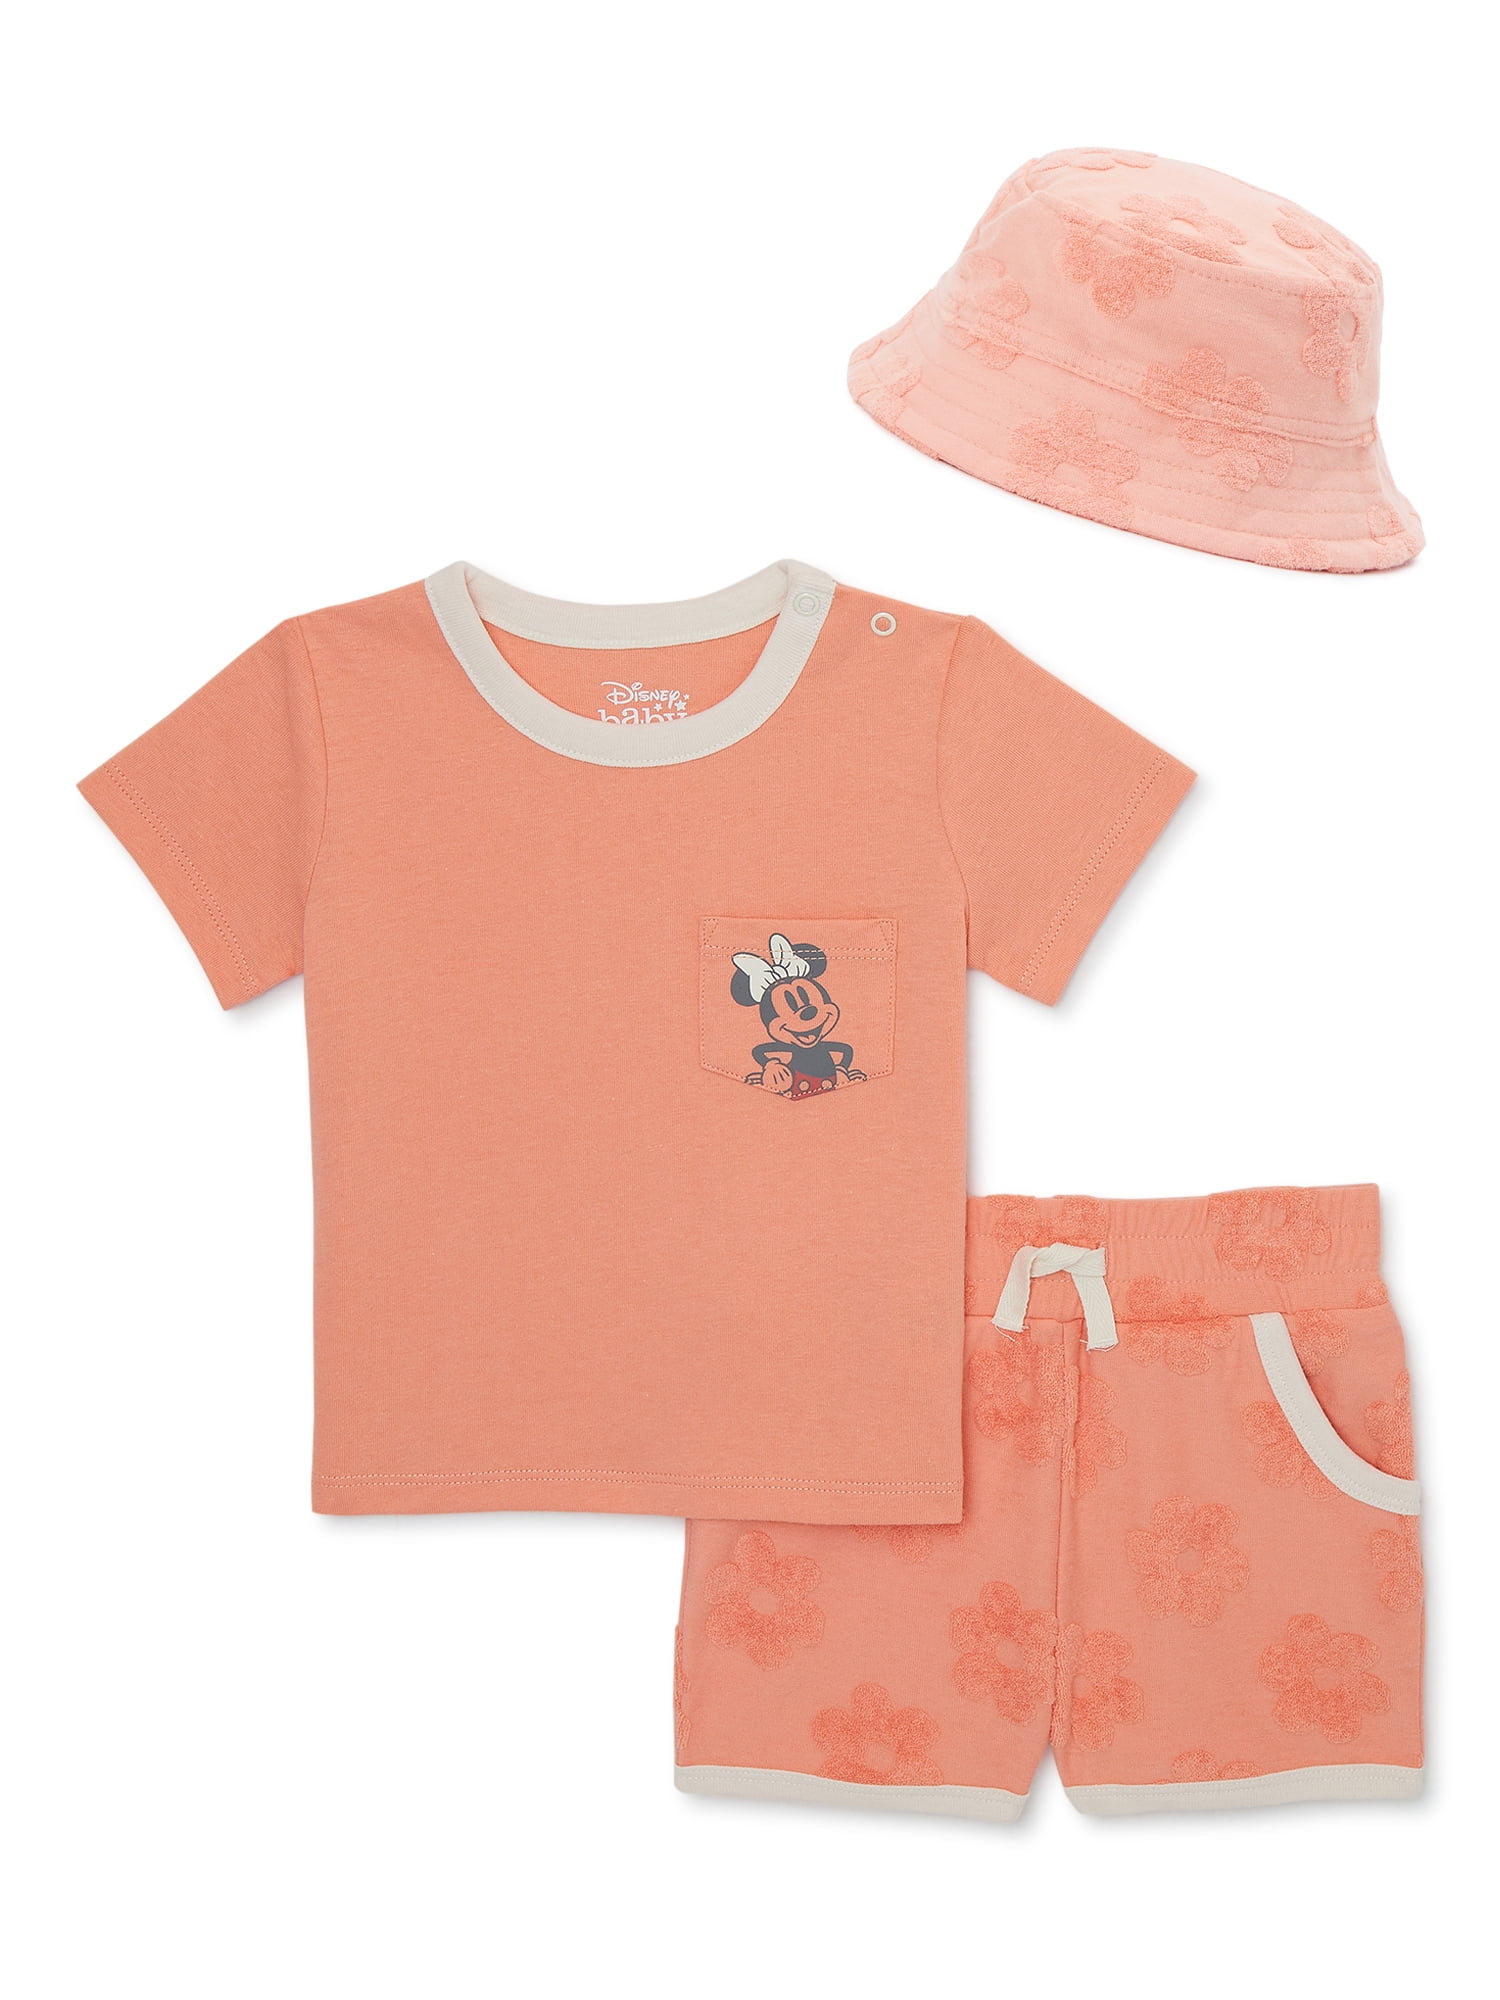 Minnie Mouse Baby Girls Terry Outfit Set, 3-Piece, Sizes 0-24 Months